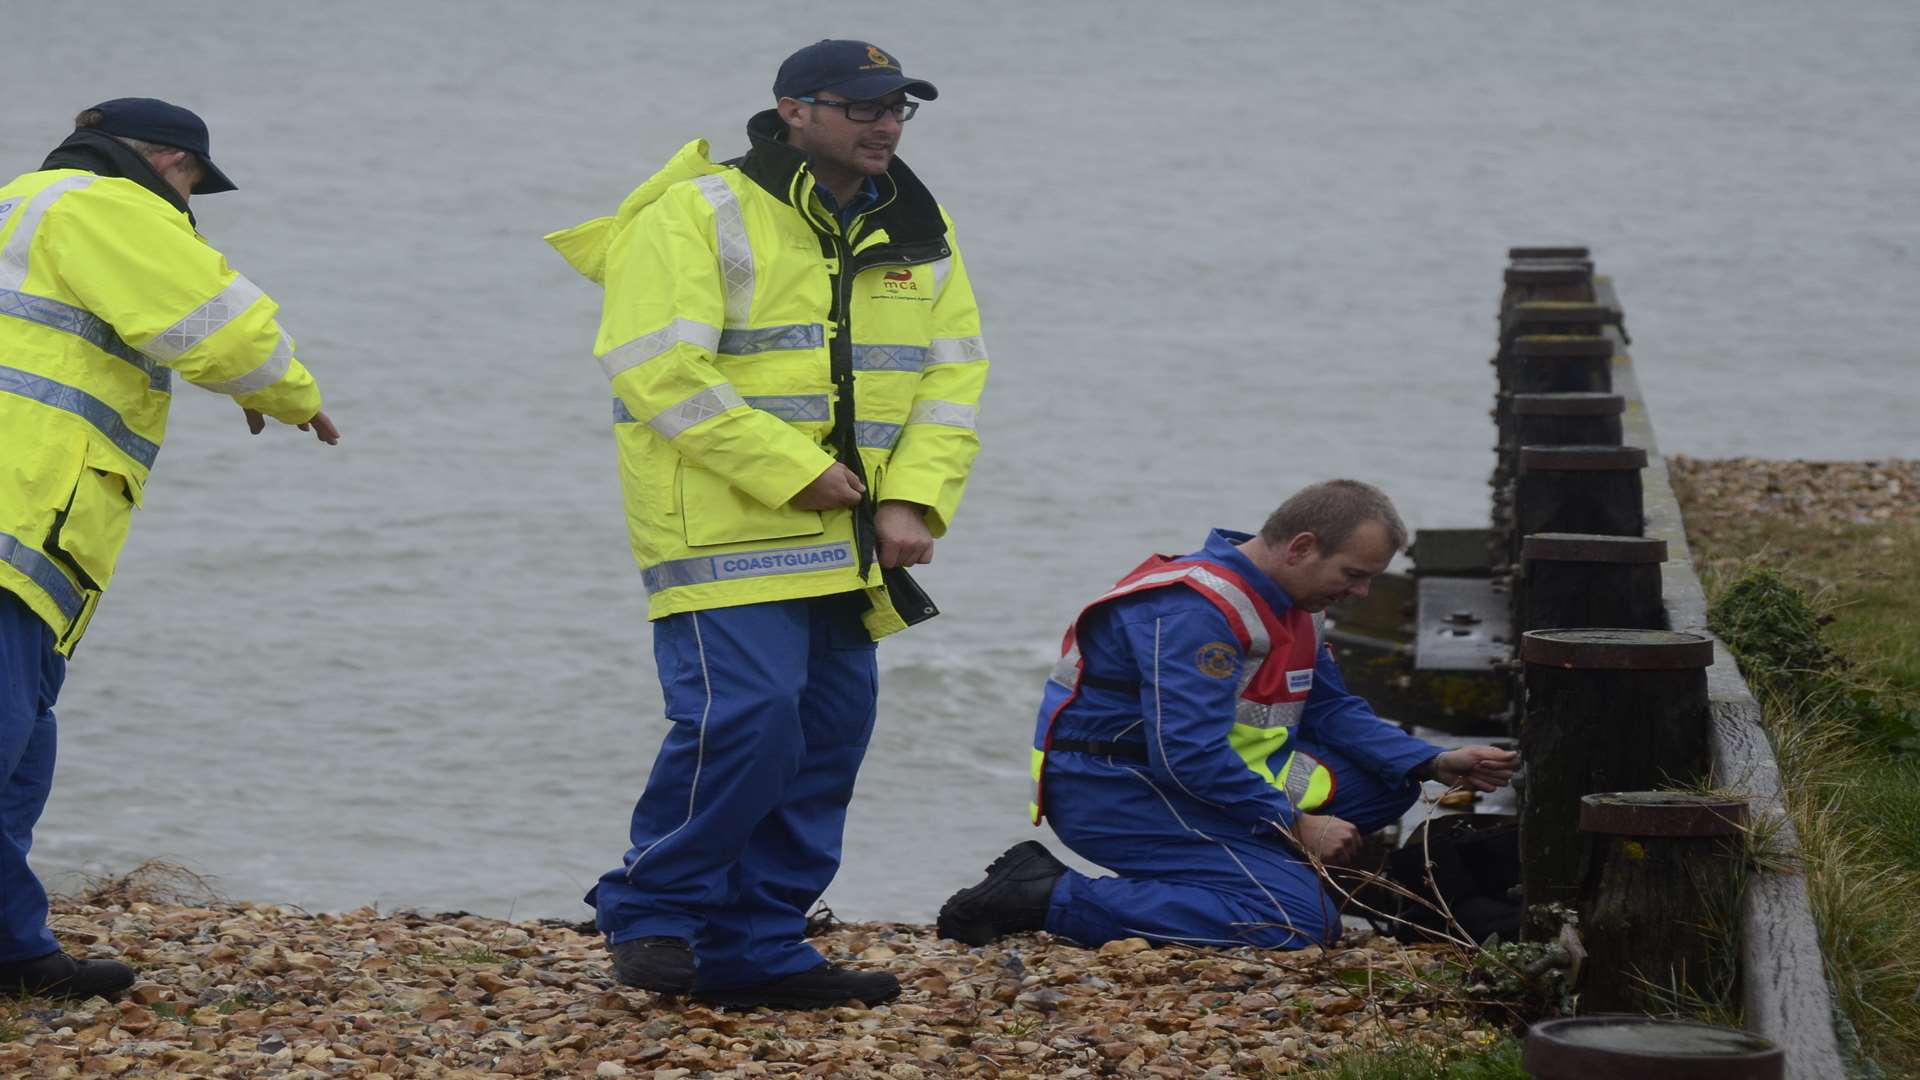 Coastguard teams inspect items of clothing found on the beach. Picture: Chris Davey